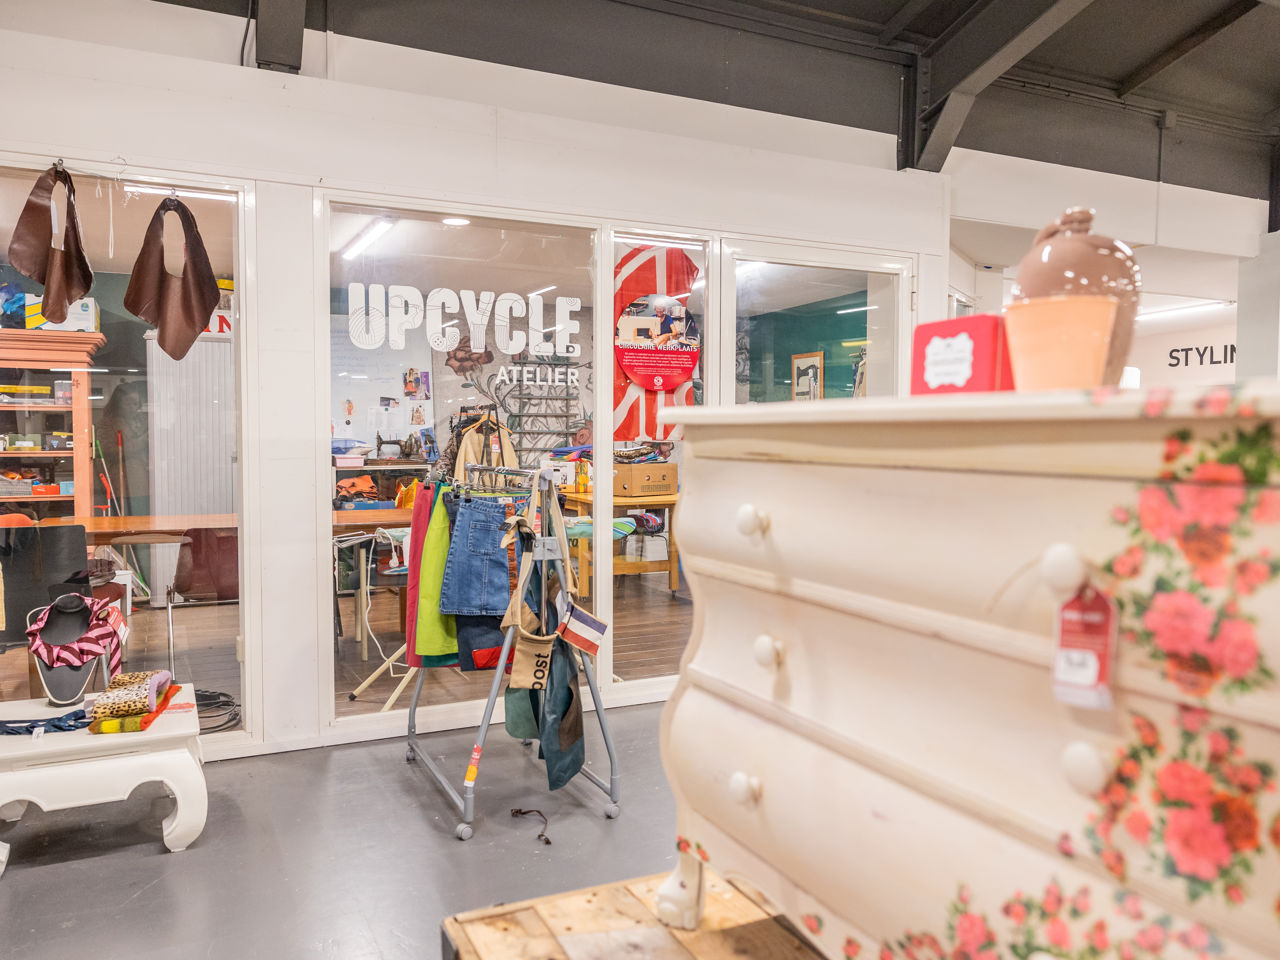 Leeuwarden Close Up Upcycle Atelier